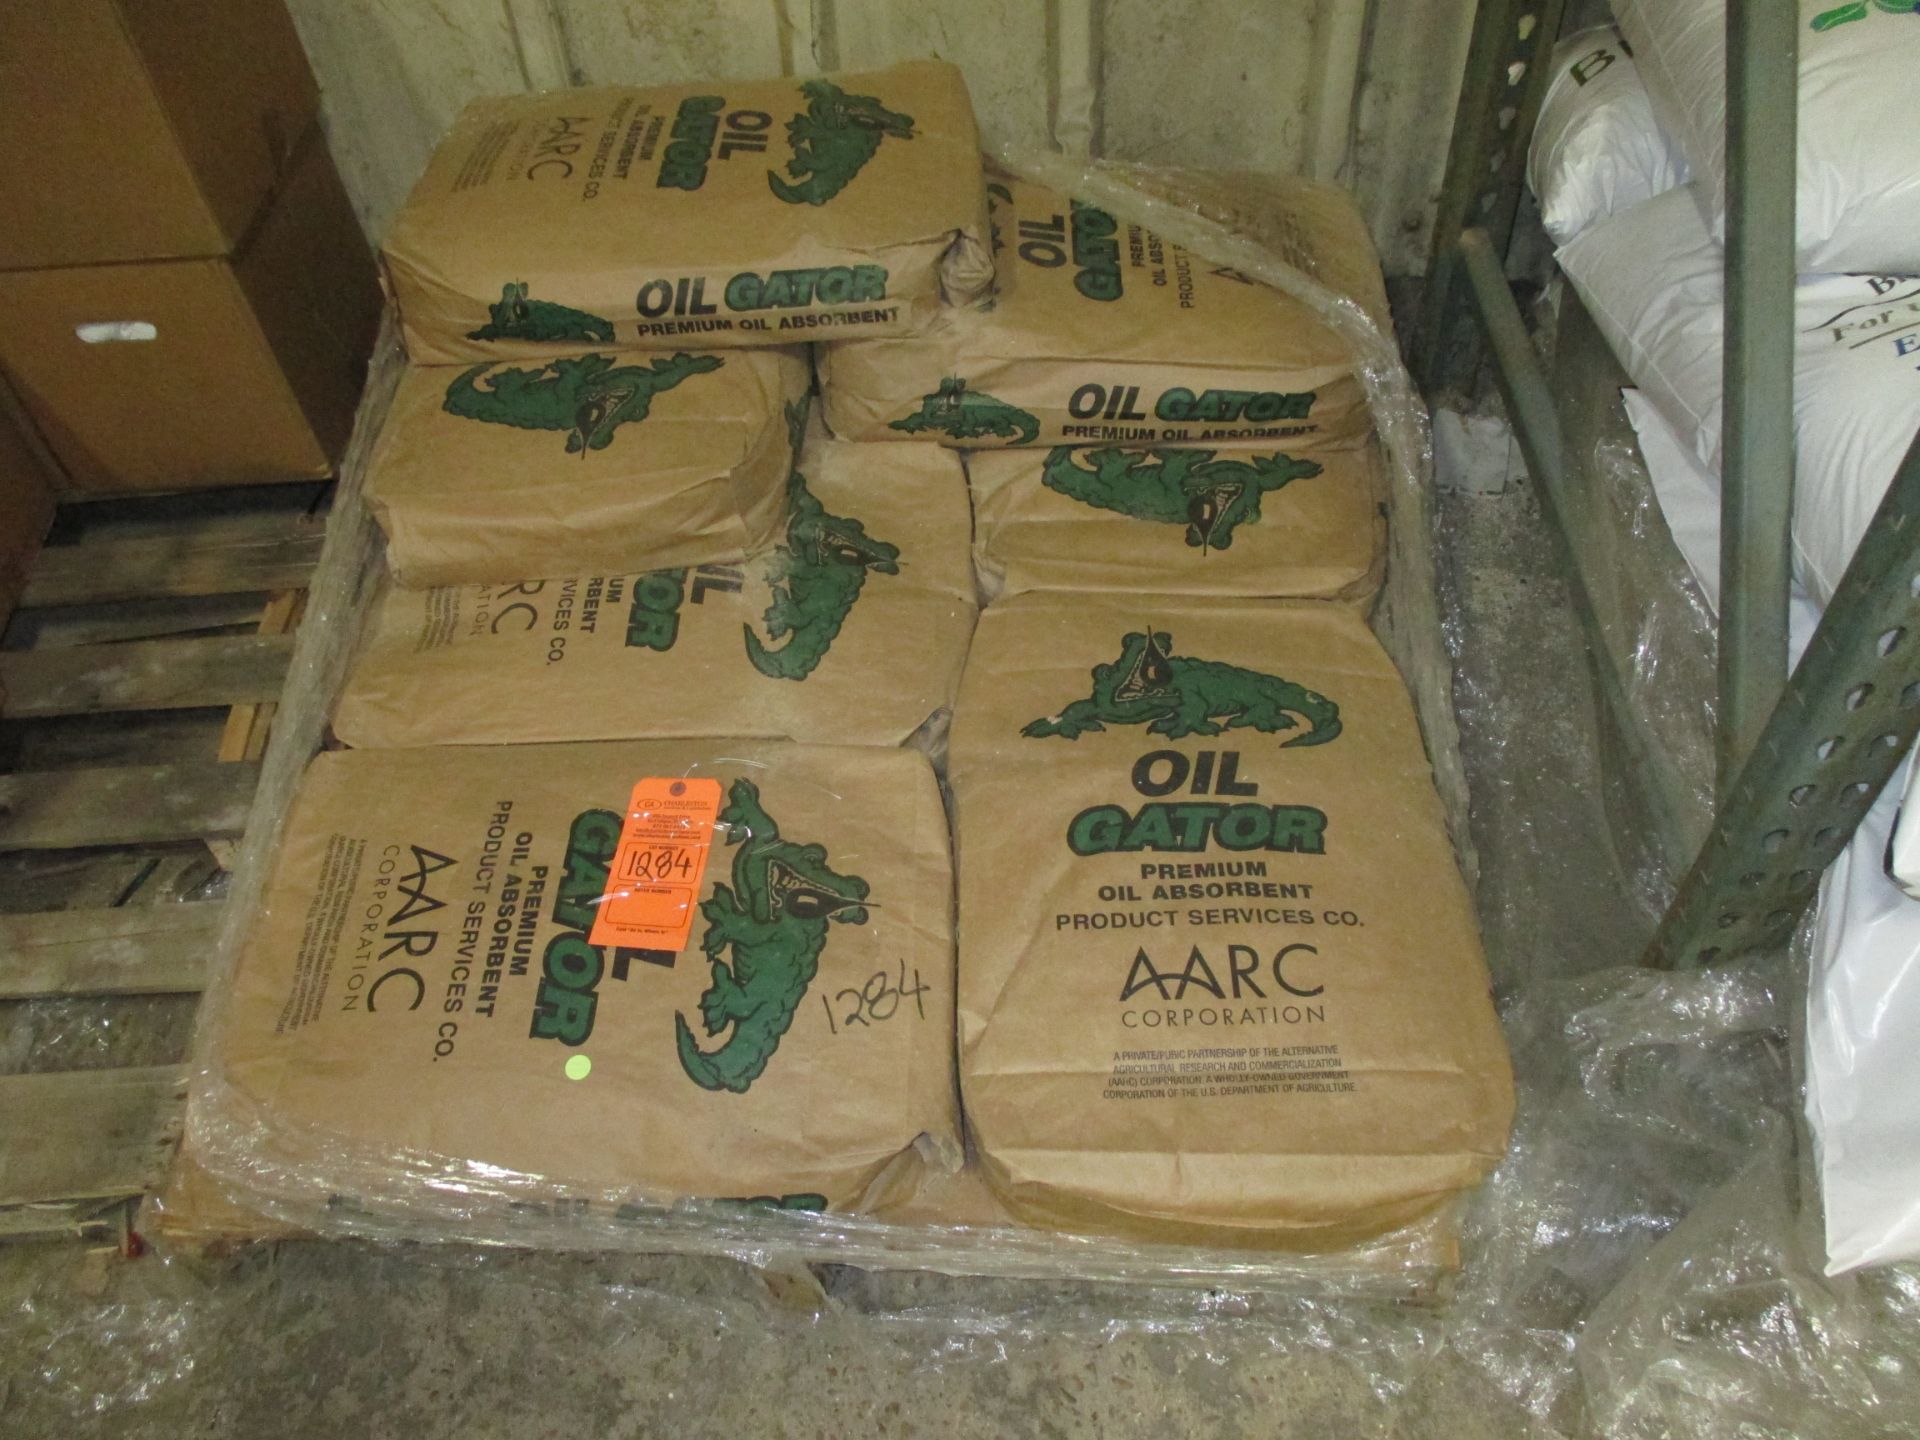 PALLET OF OIL GATOR PREMIUM OIL ABSORBENT (LOCATED AT 100 INDUSTRIAL AVE KILGORE TX 75662)